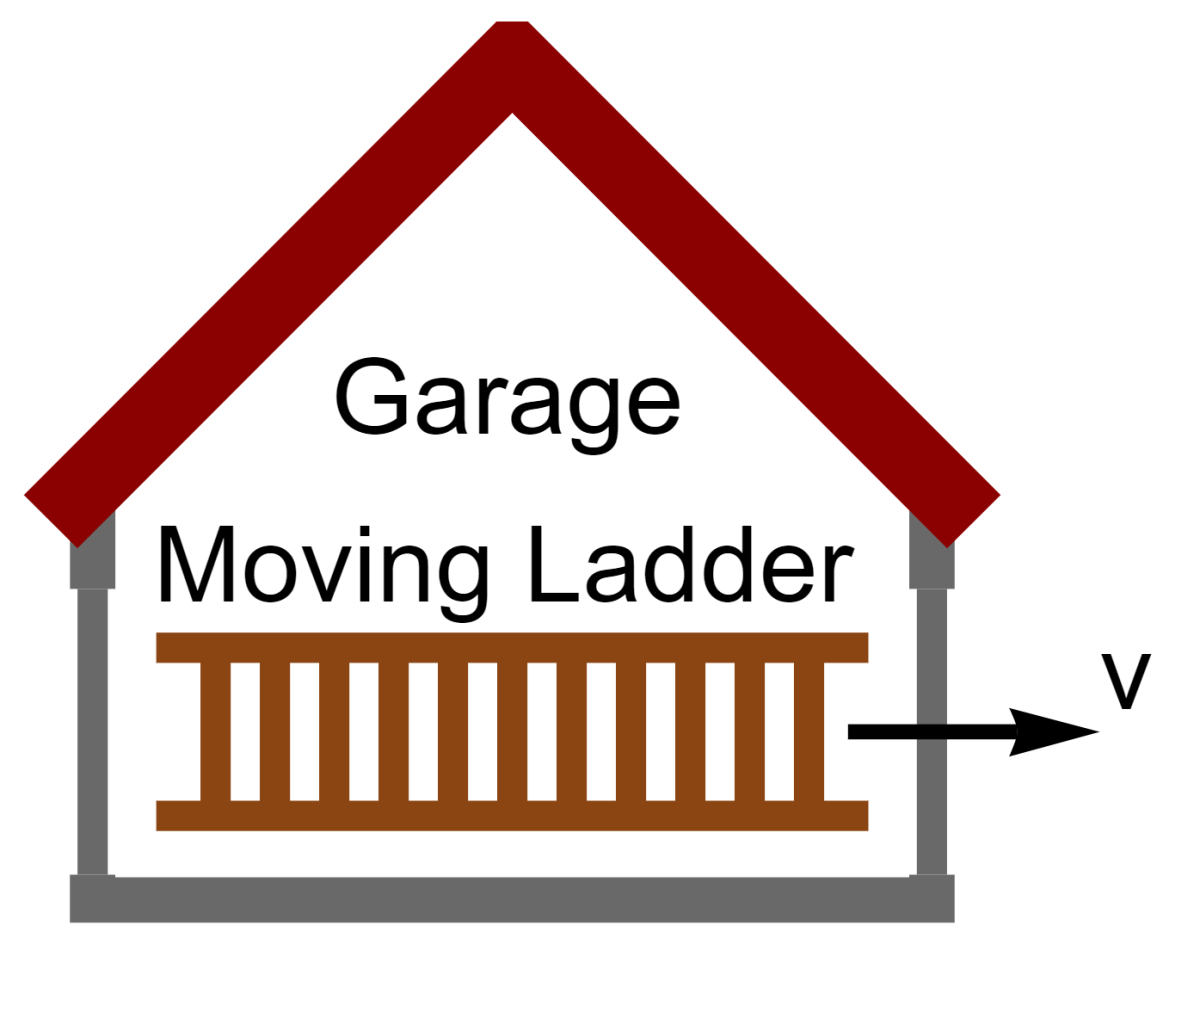 Due to length contraction, when the ladder is moving, it is able to "fit" inside the garage.